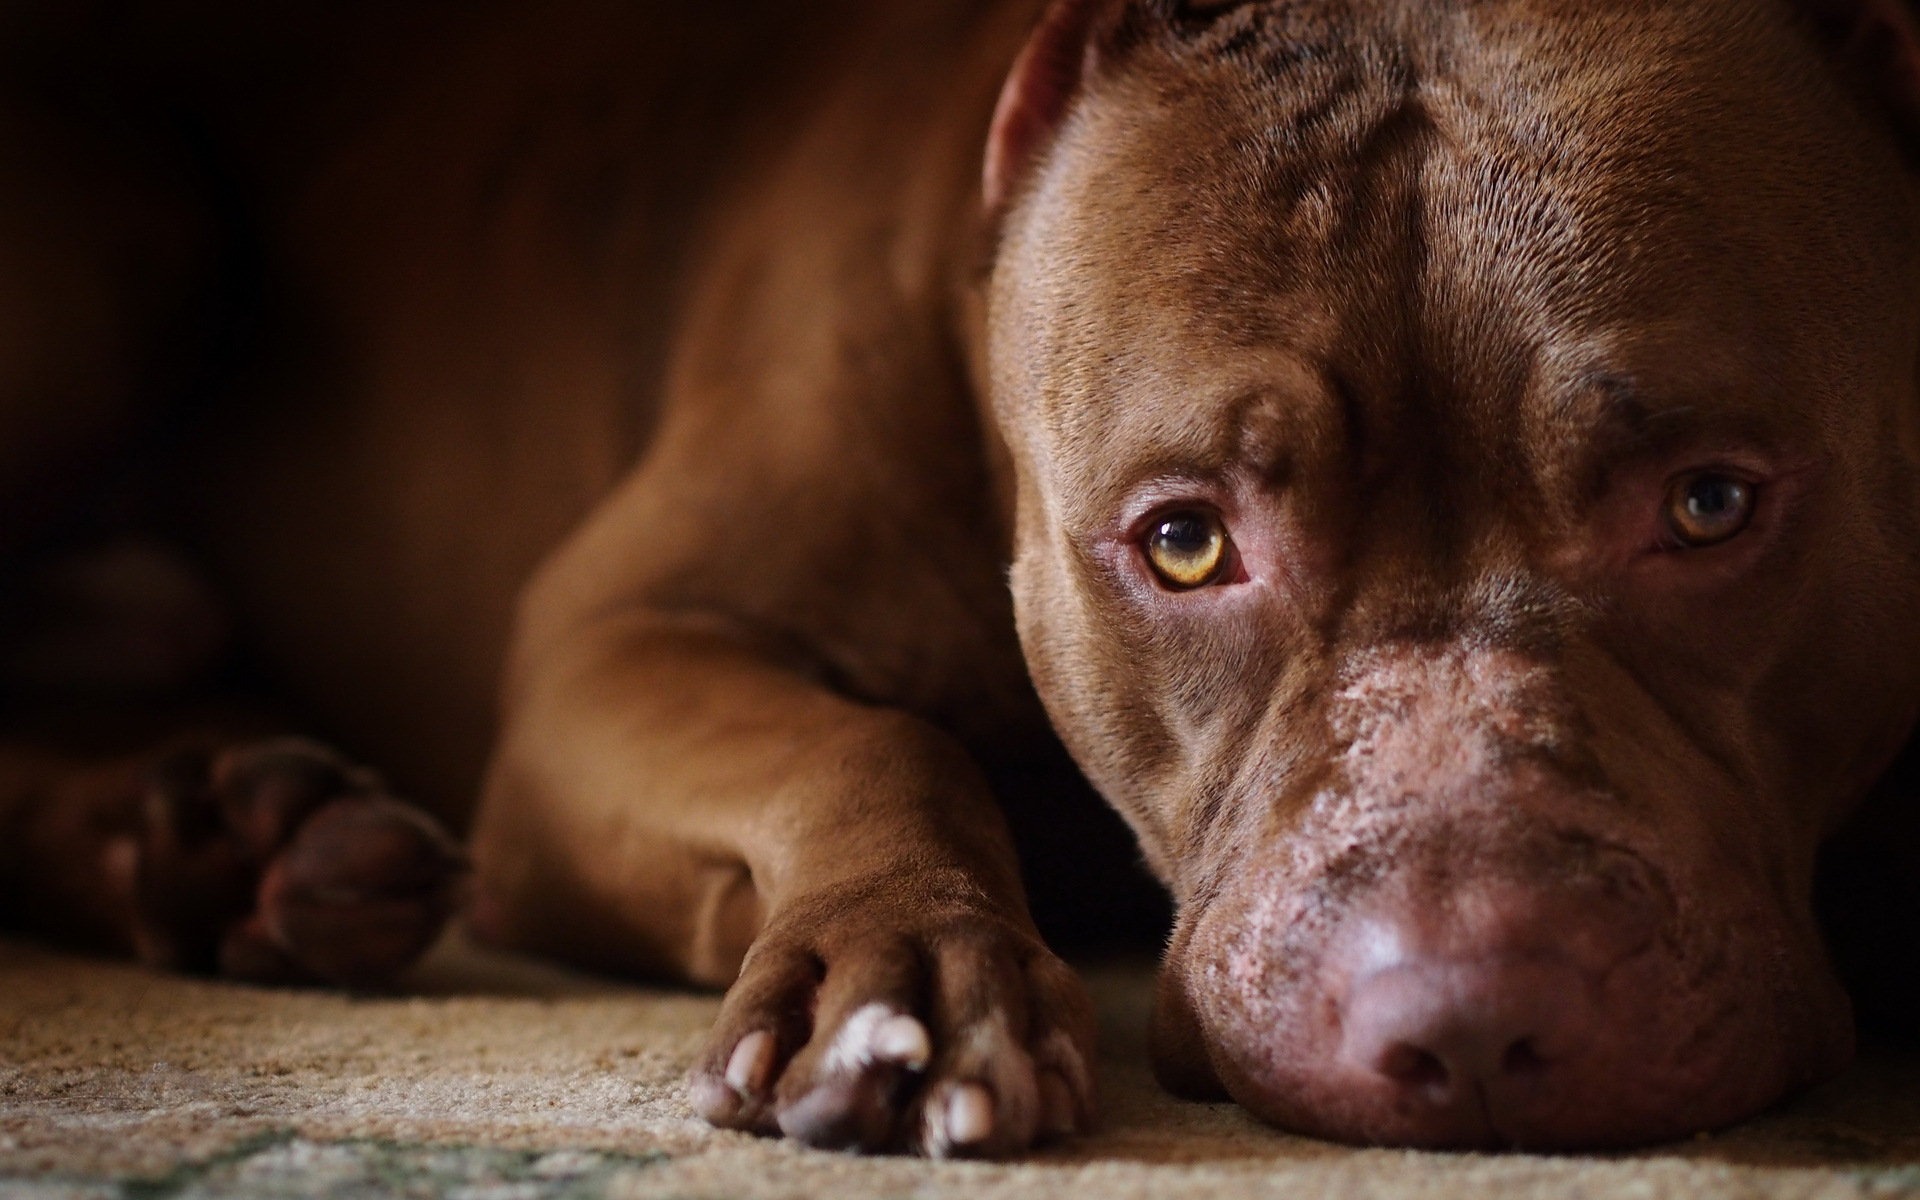 Desktop hd images of fighting pit bulls dogs